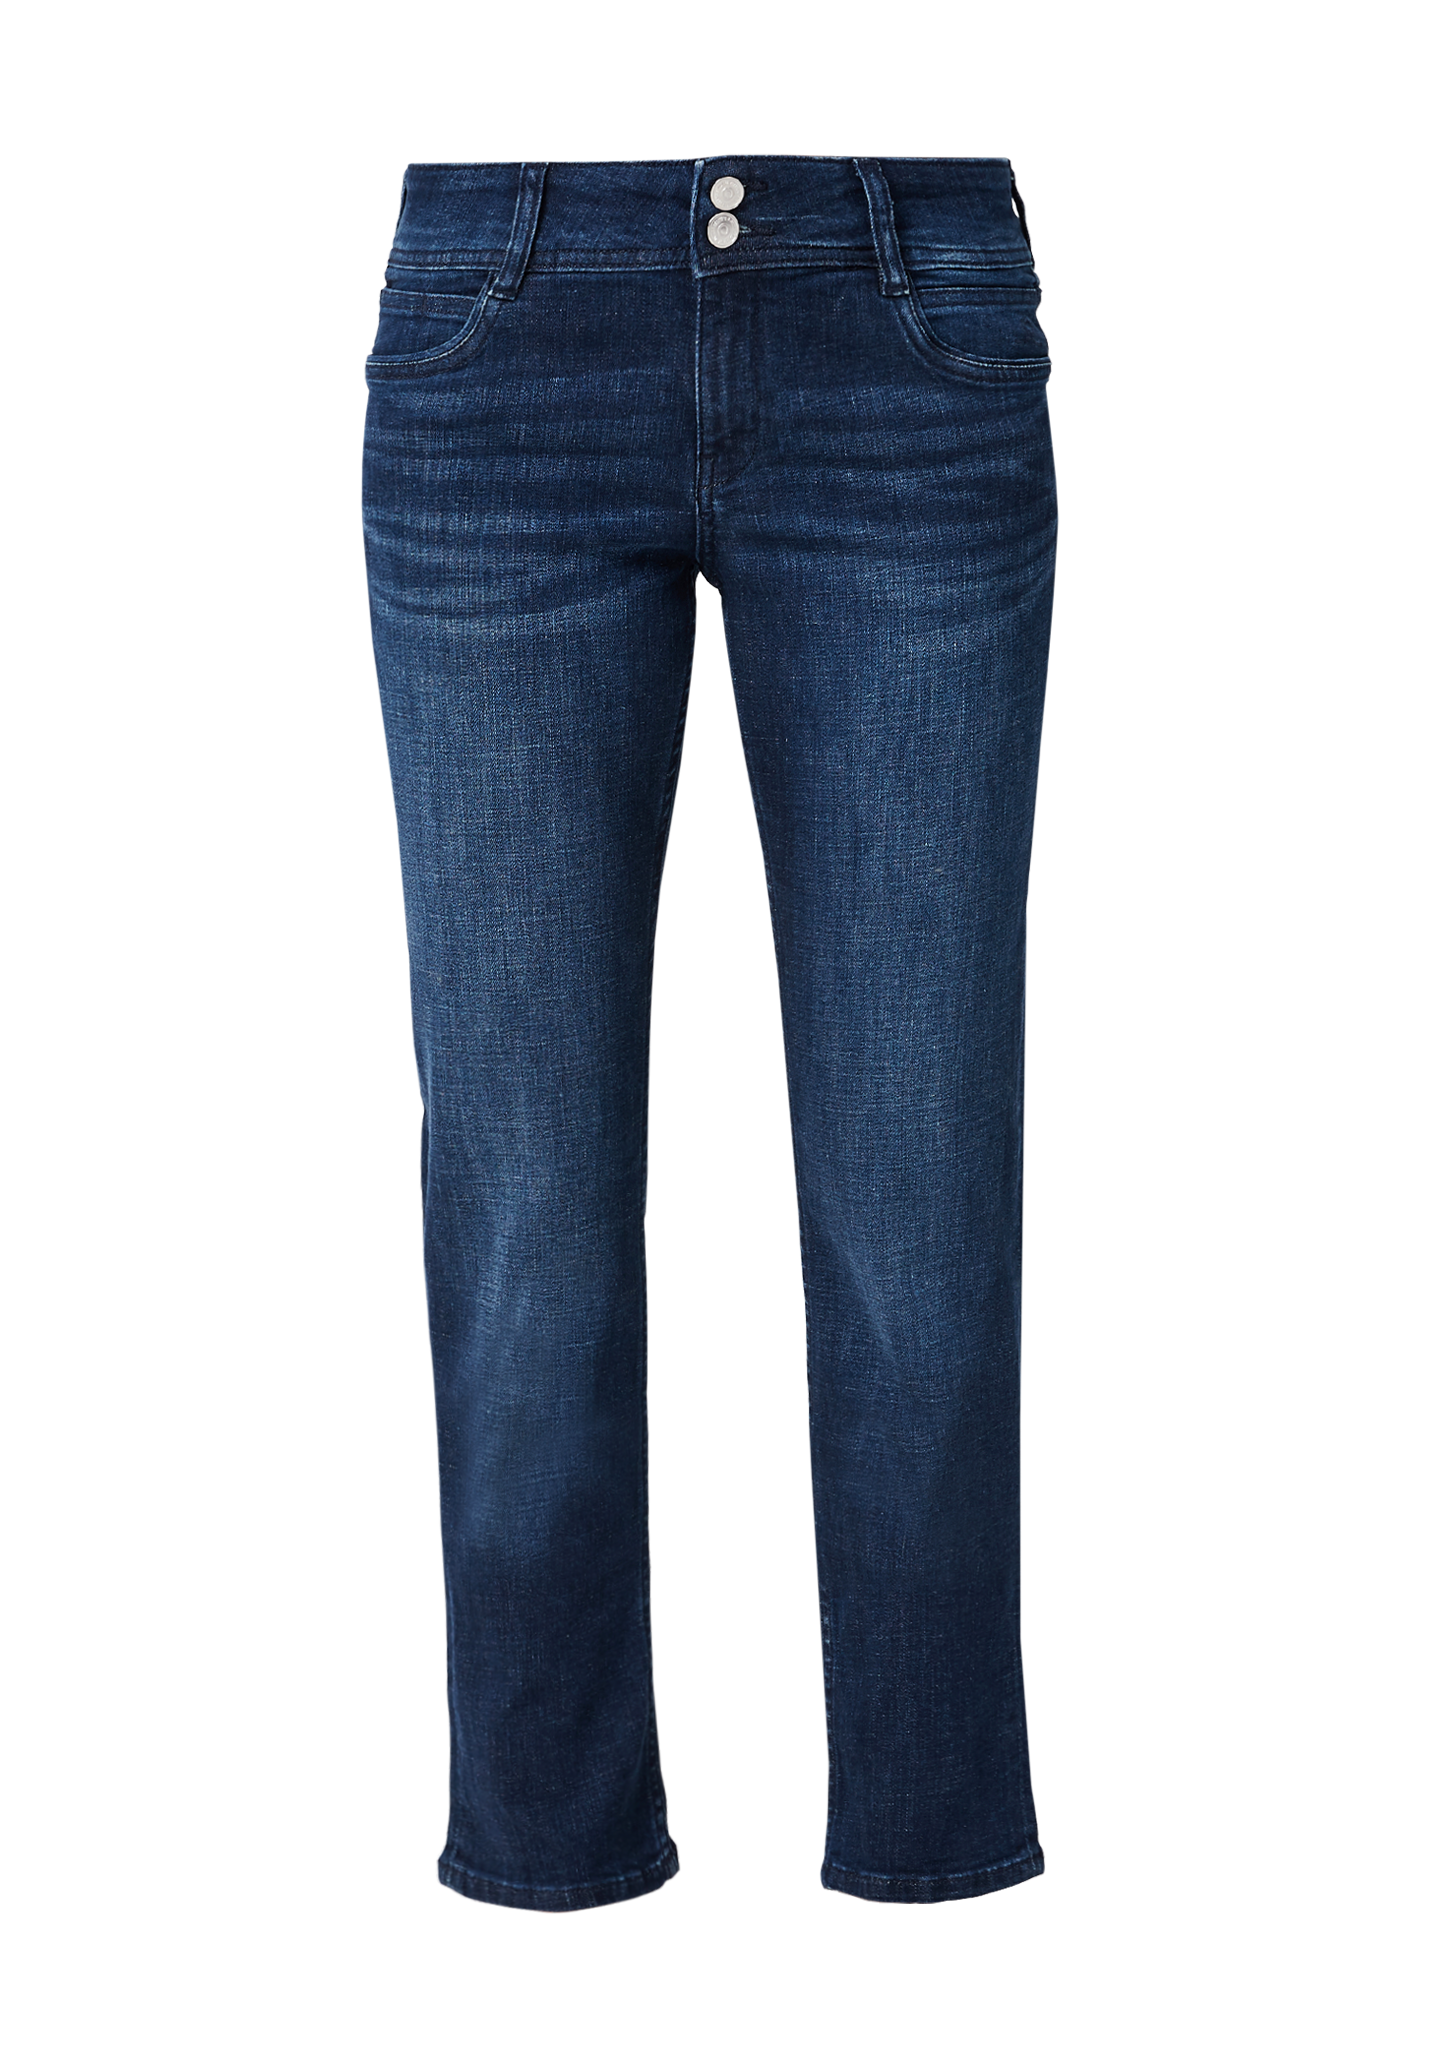 high rise jeans style